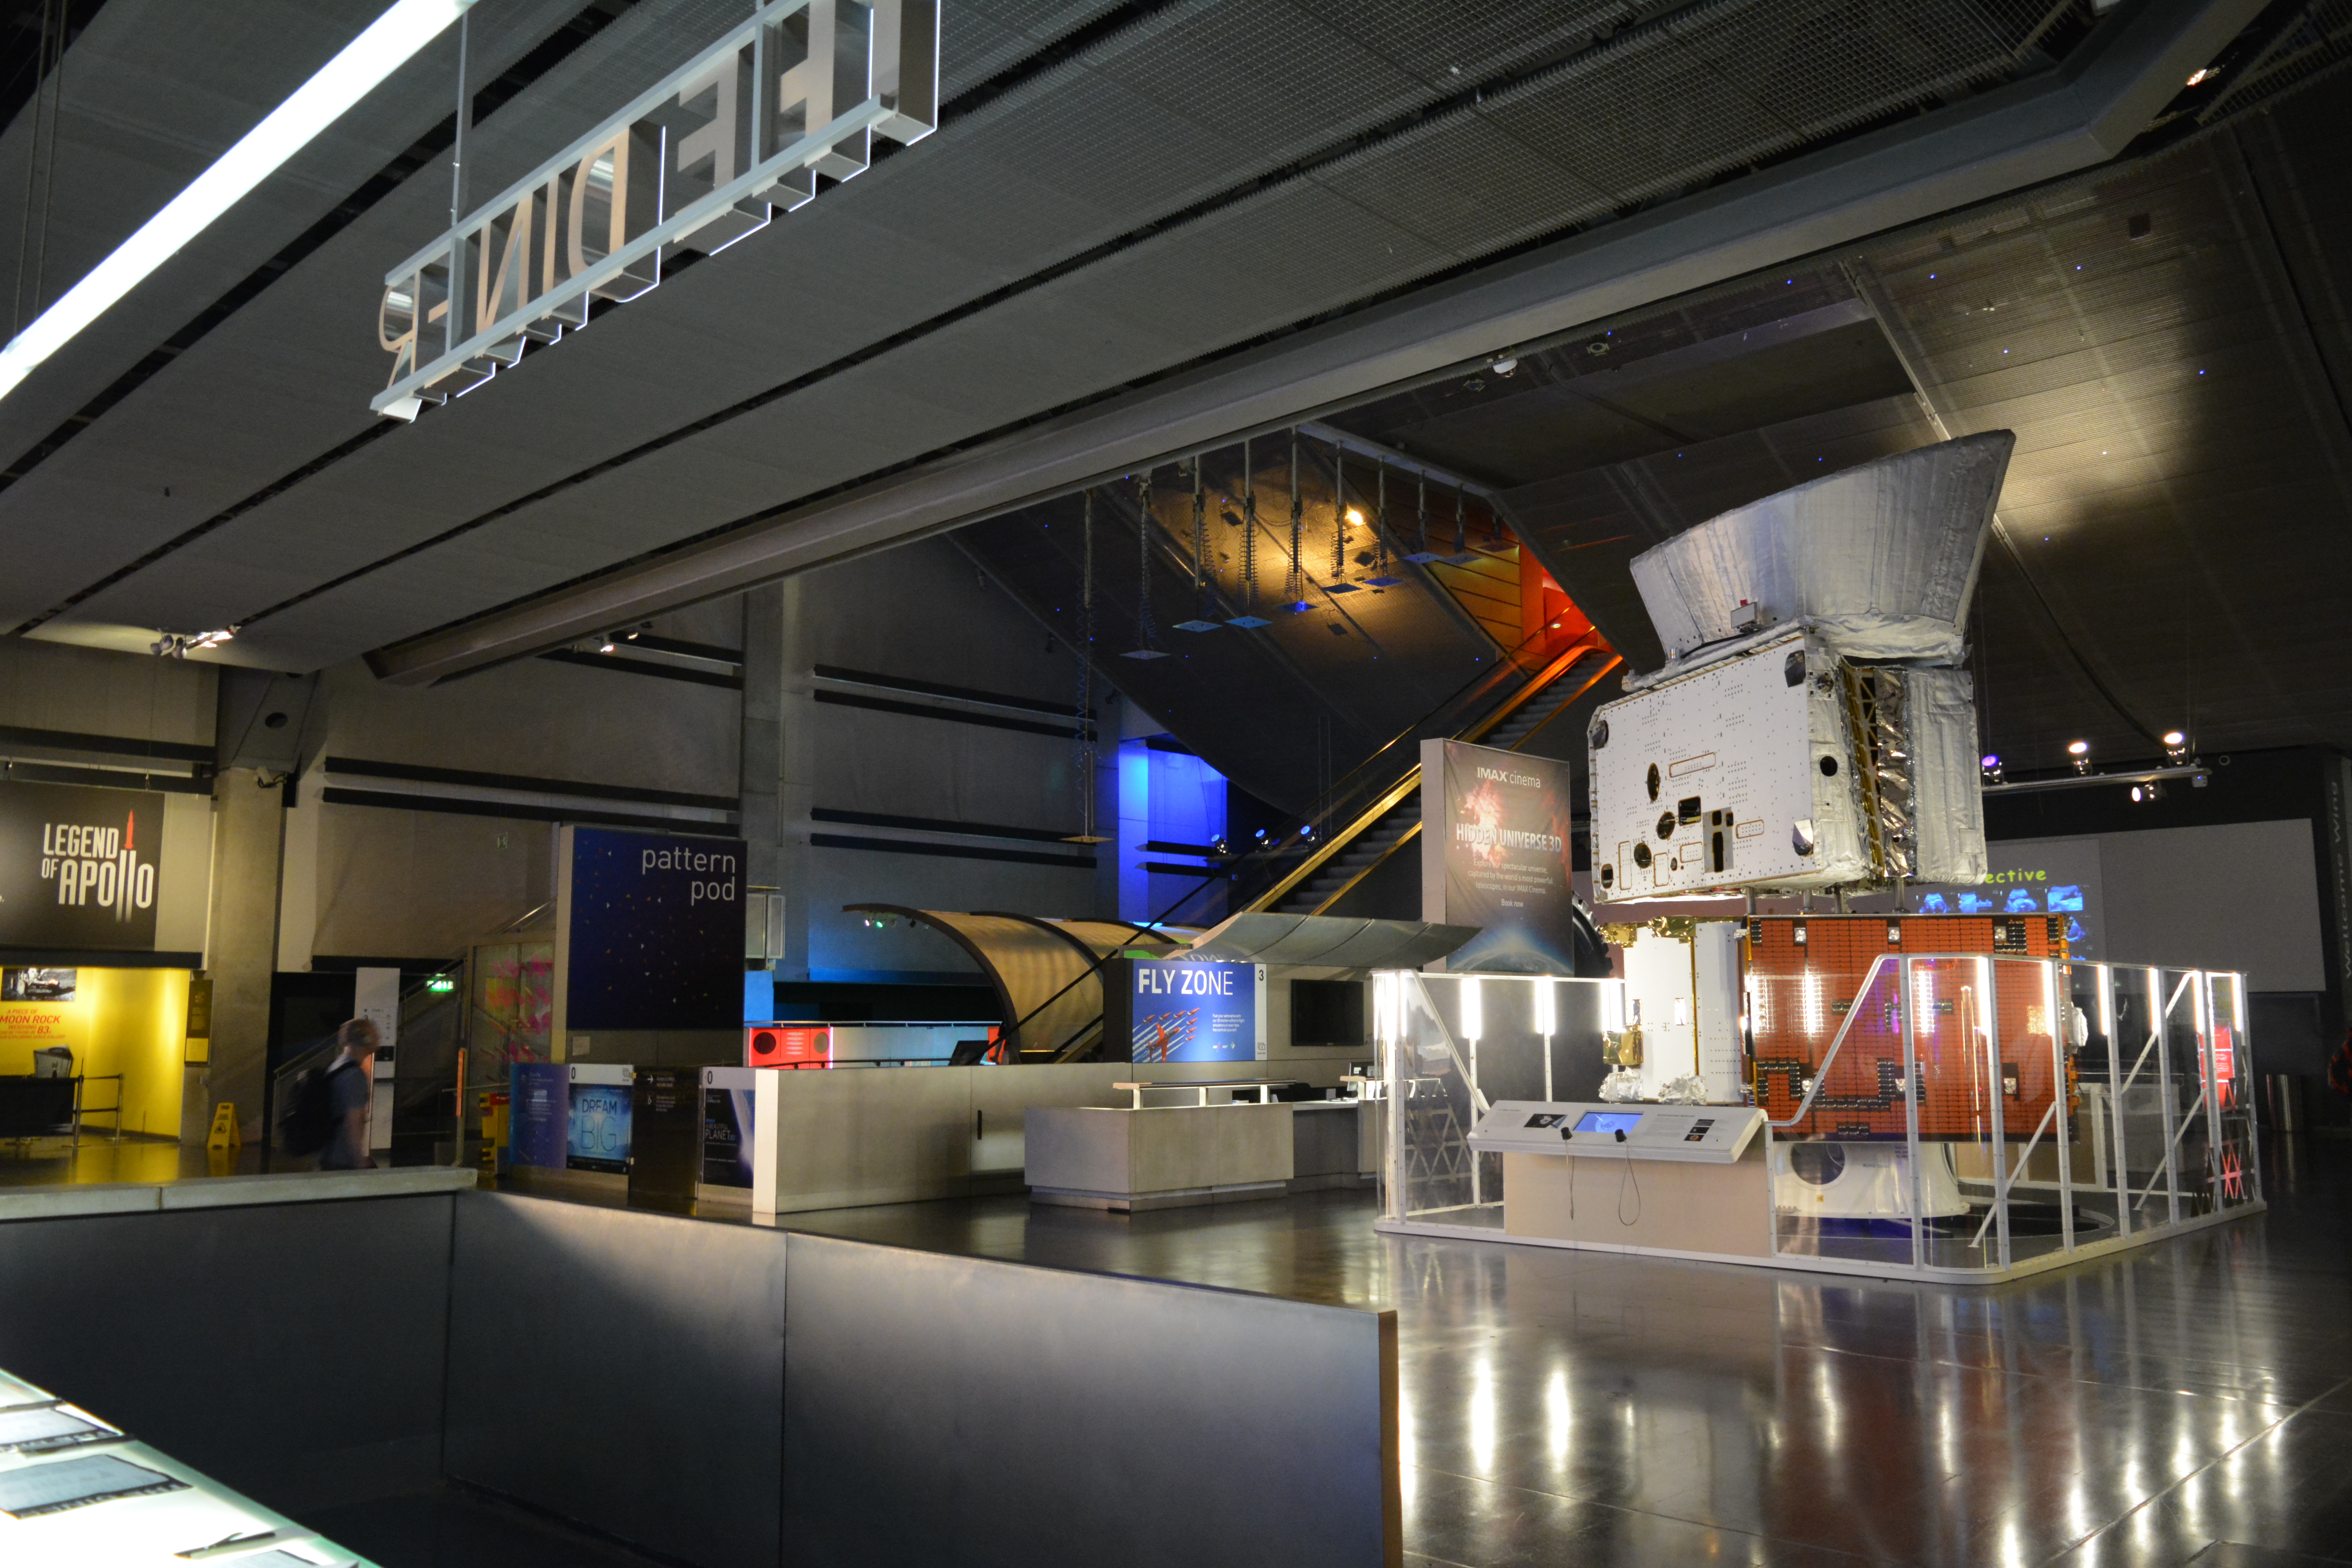 BepiColombo prototype and entrance to our Legend of Apollo cinema on display in the Tomorrow's World gallery